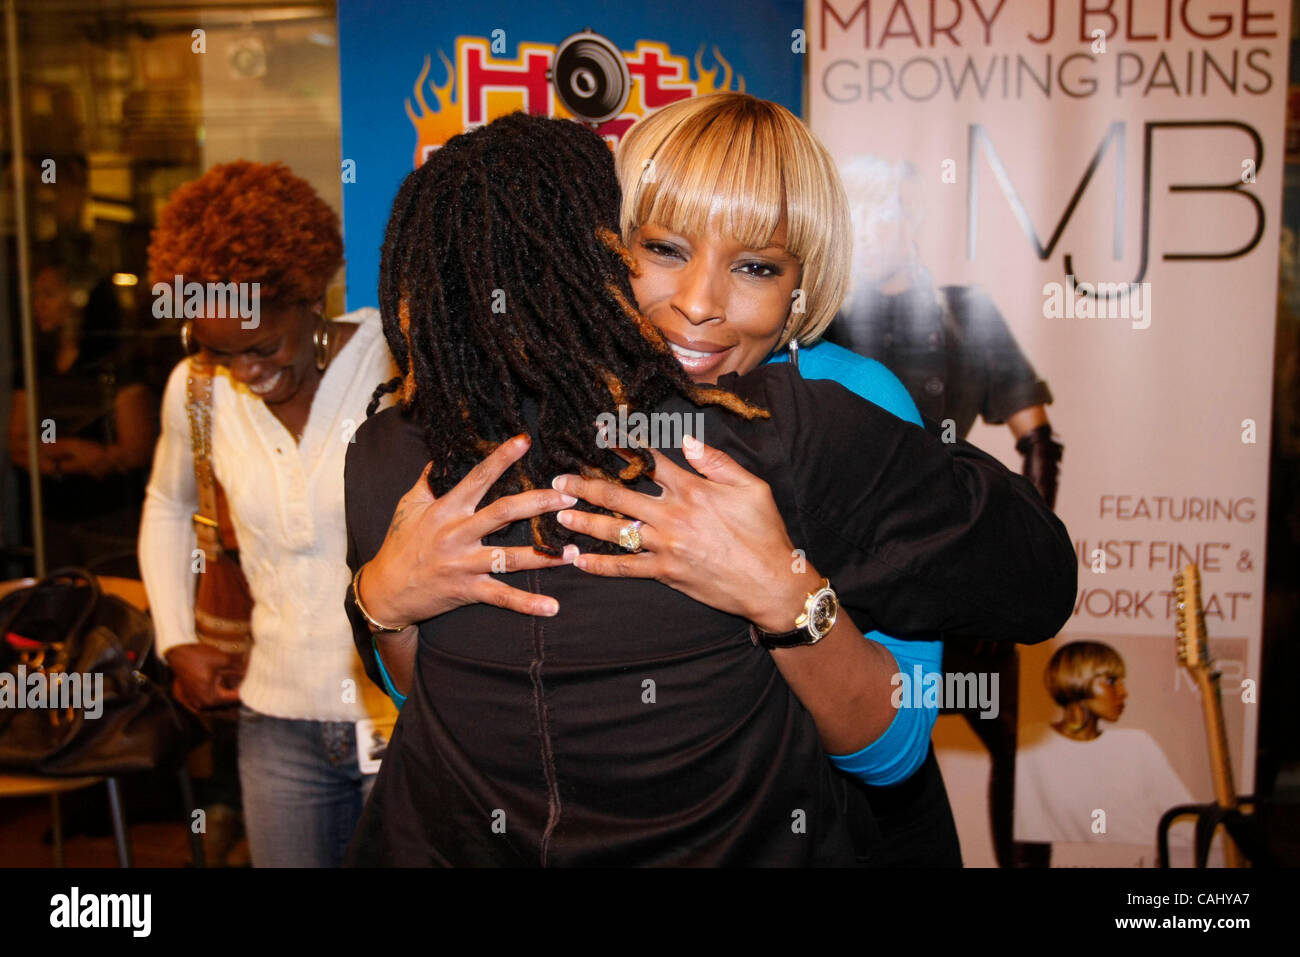 Mary J. Blige performing at Sirius Radio's offices 'fish bowl' for fans. She sang songs from her new album 'Growing Pains' during the live set broadcast on the satellite station NYC December 21, 2007. Stock Photo